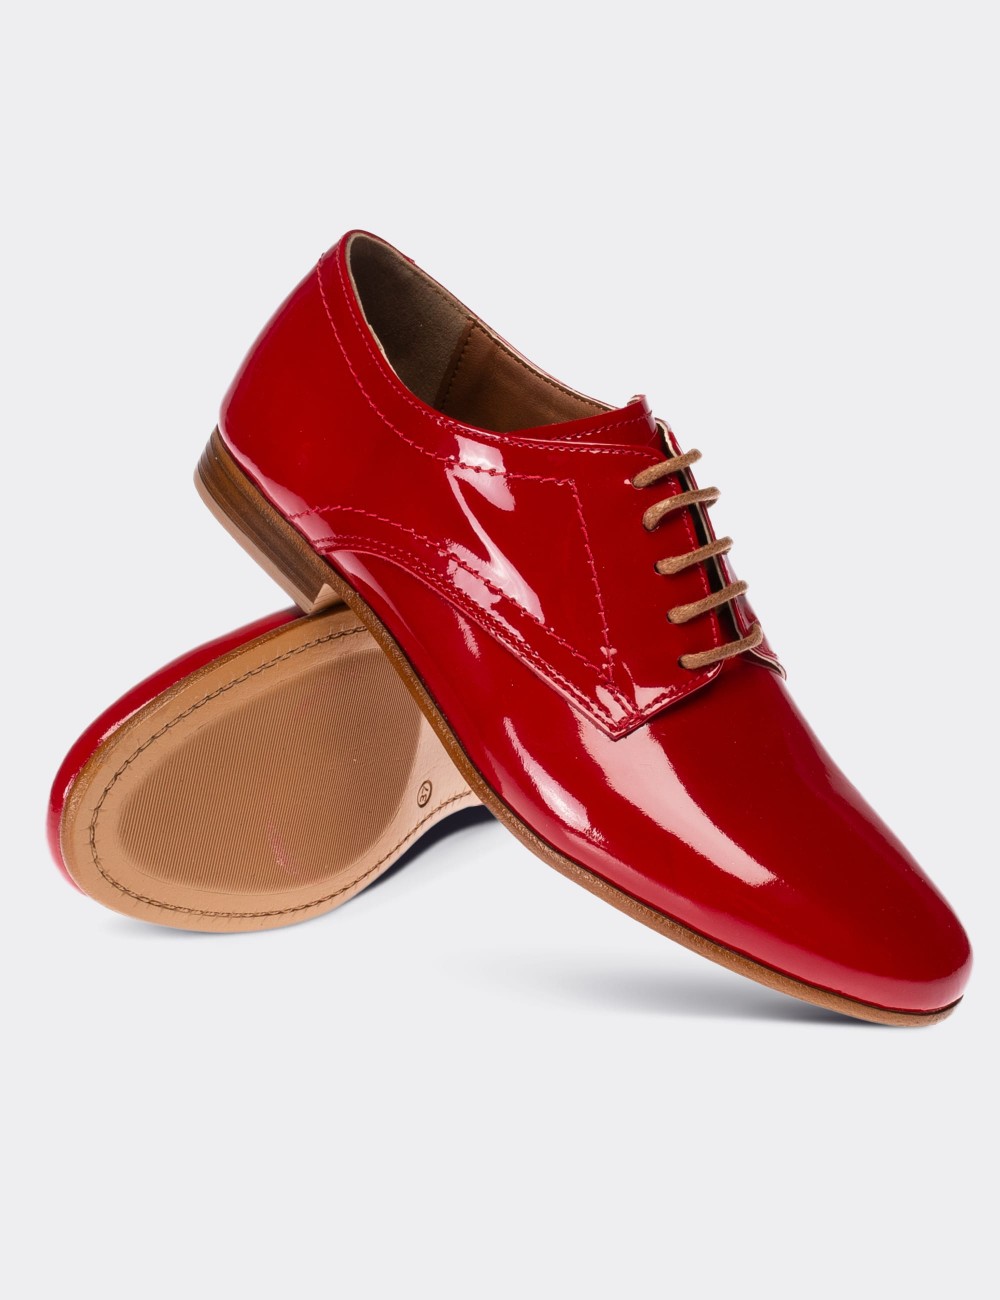 Red Patent Leather Lace-up Shoes - 01430ZKRMC03